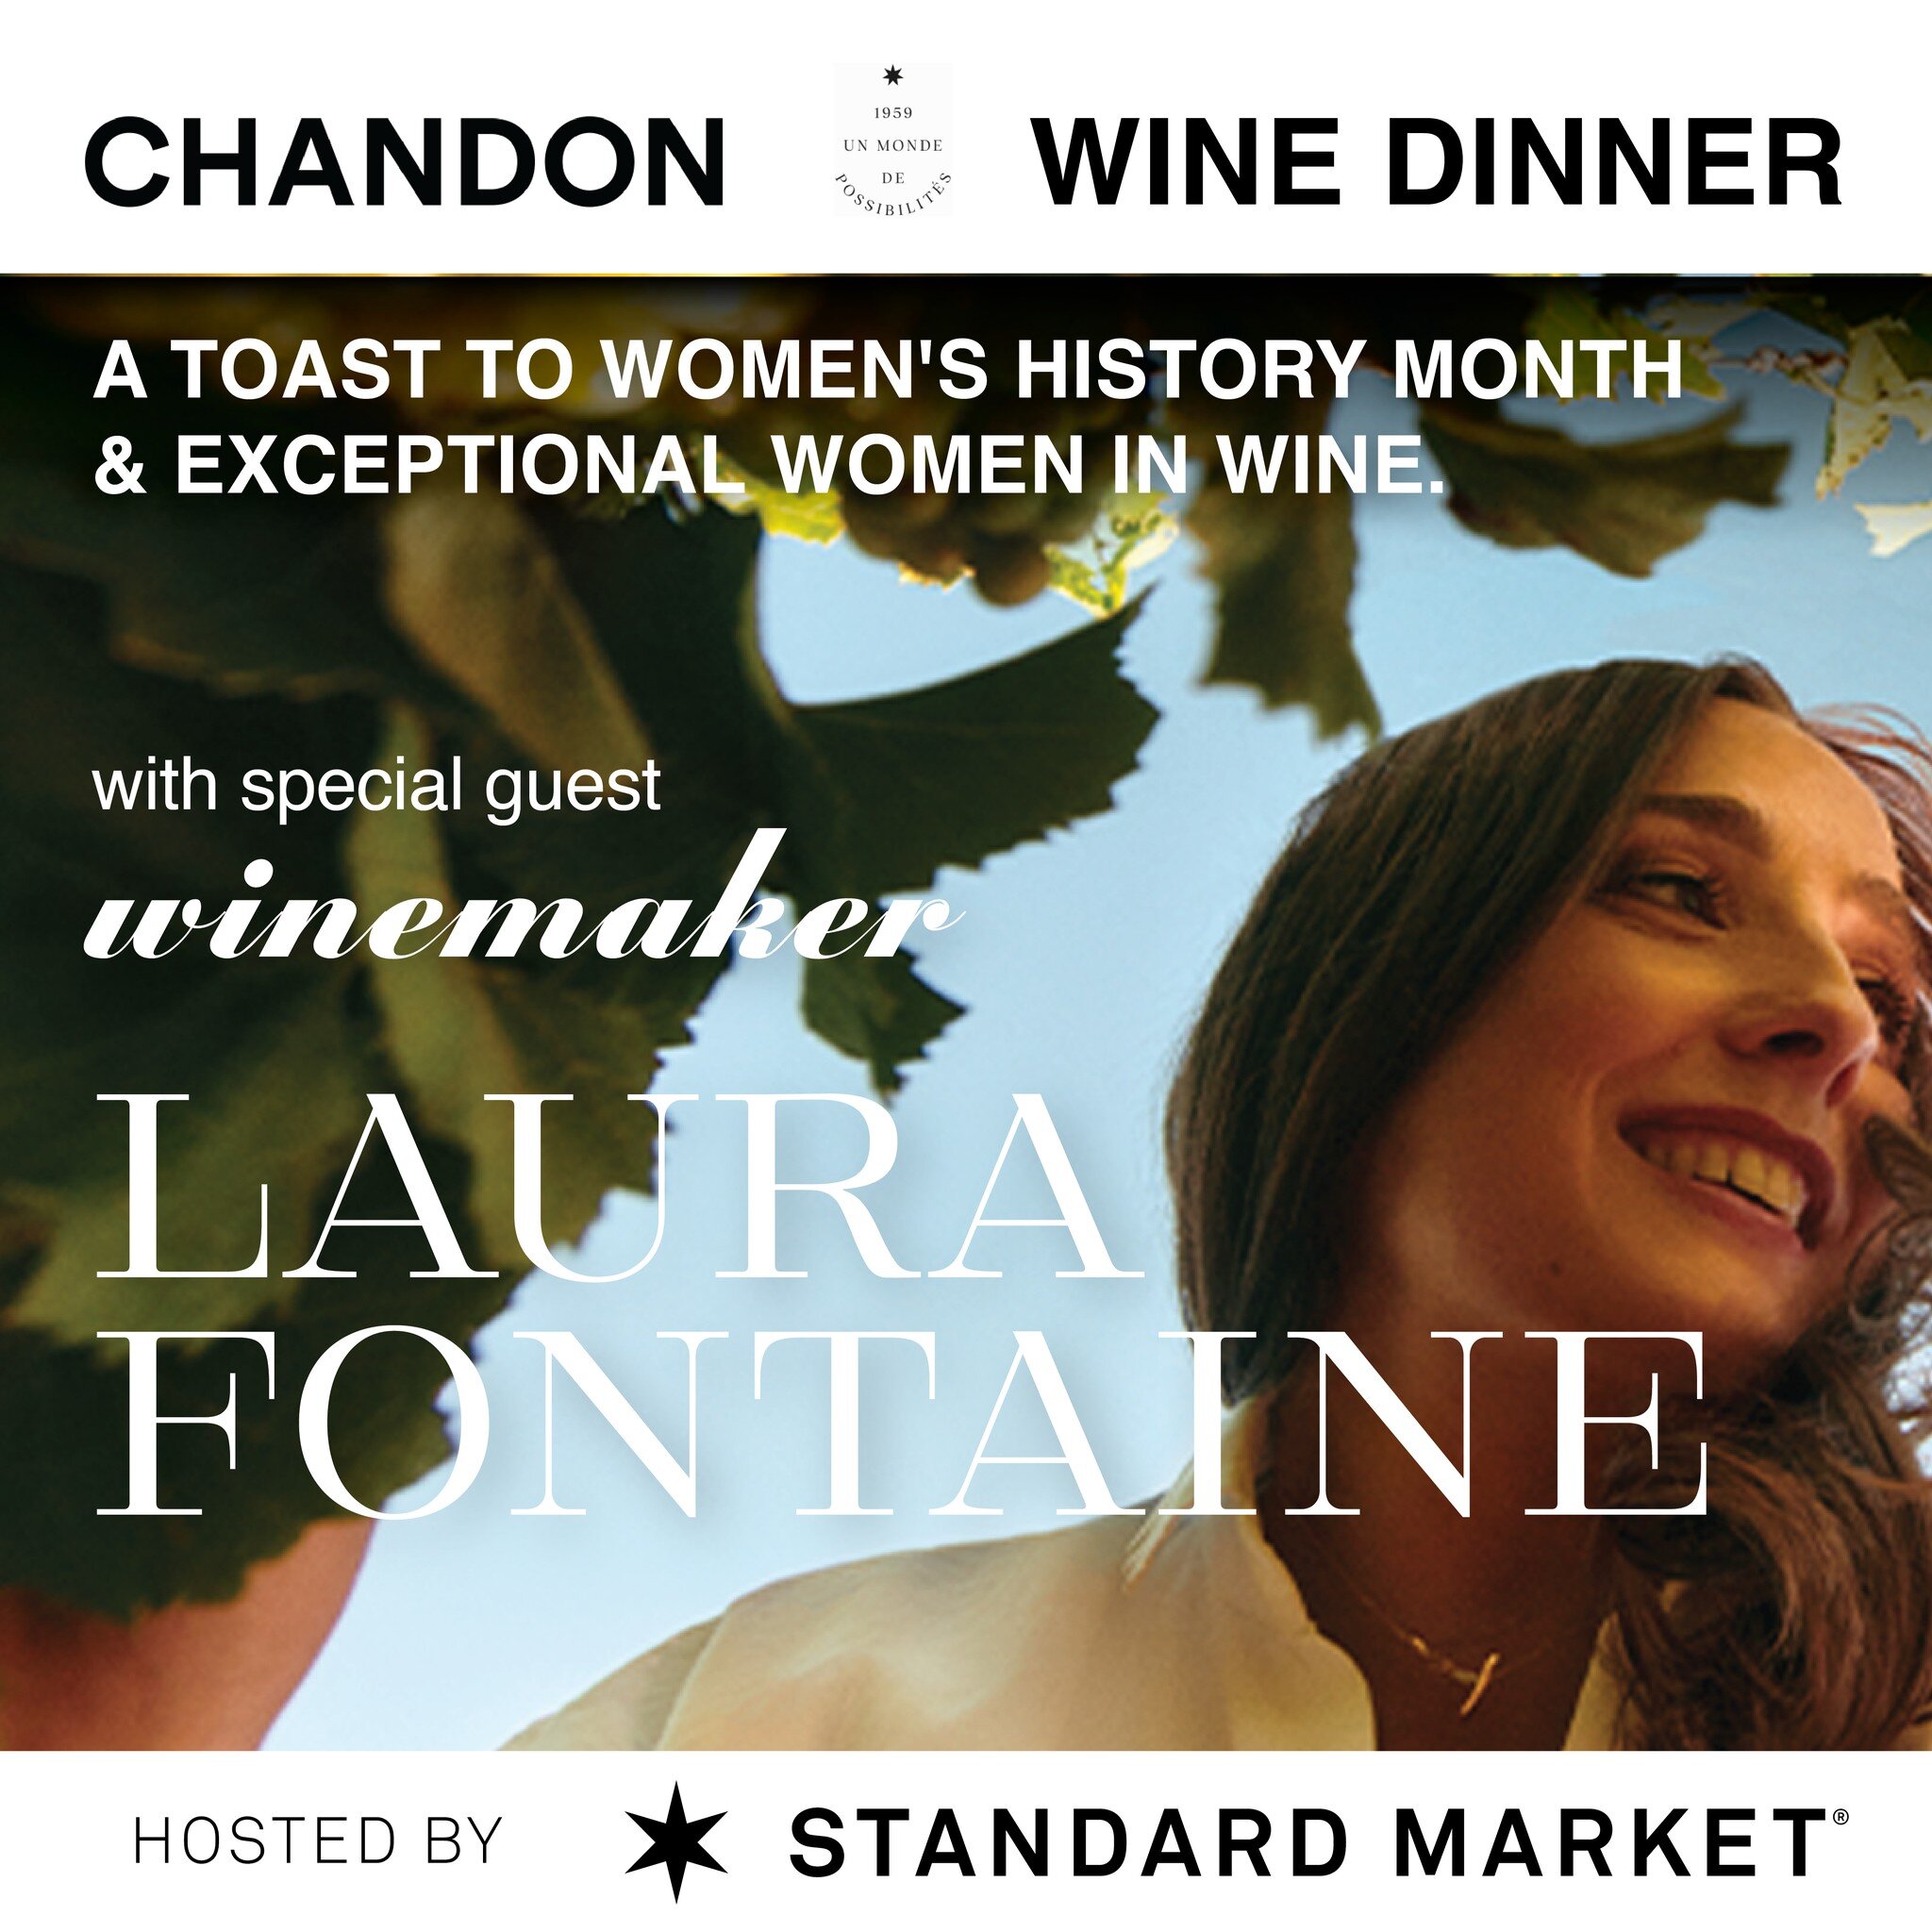 A toast to women&rsquo;s history month and exceptional women in wine.
Meet Laura Fontaine as she guides us through the world of wine at Chandon Winery. Join us on Wednesday, March 13th from 6:30 - 8:30PM. Tickets are $85. Seats are limited and regist